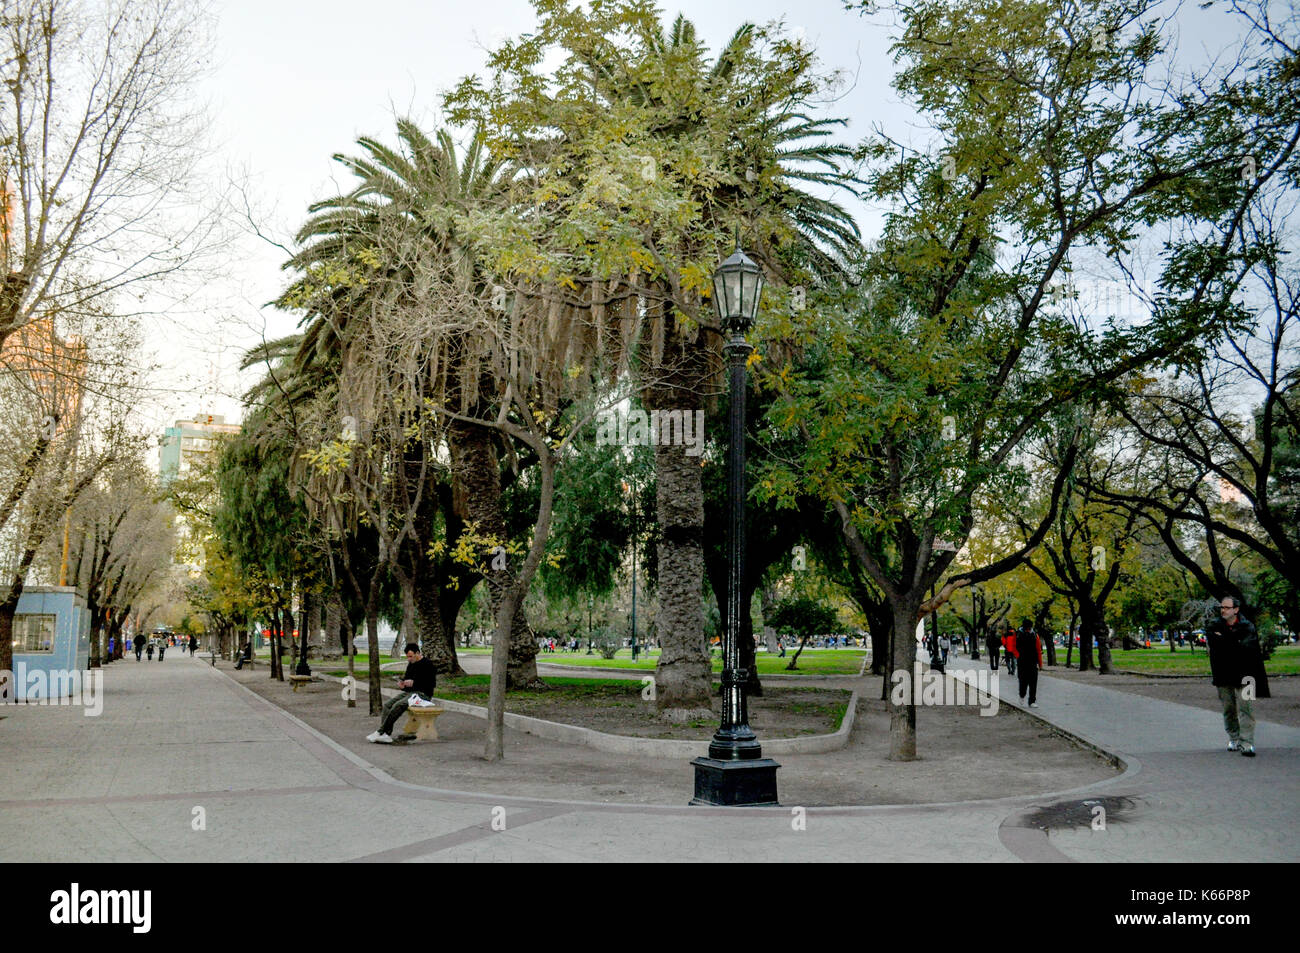 BAHIA BLANCA, ARGENTINA - DECEMBER 20, 2016:  General view of the main square of Bahia Blanca, Buenos Aires, Argentina Stock Photo